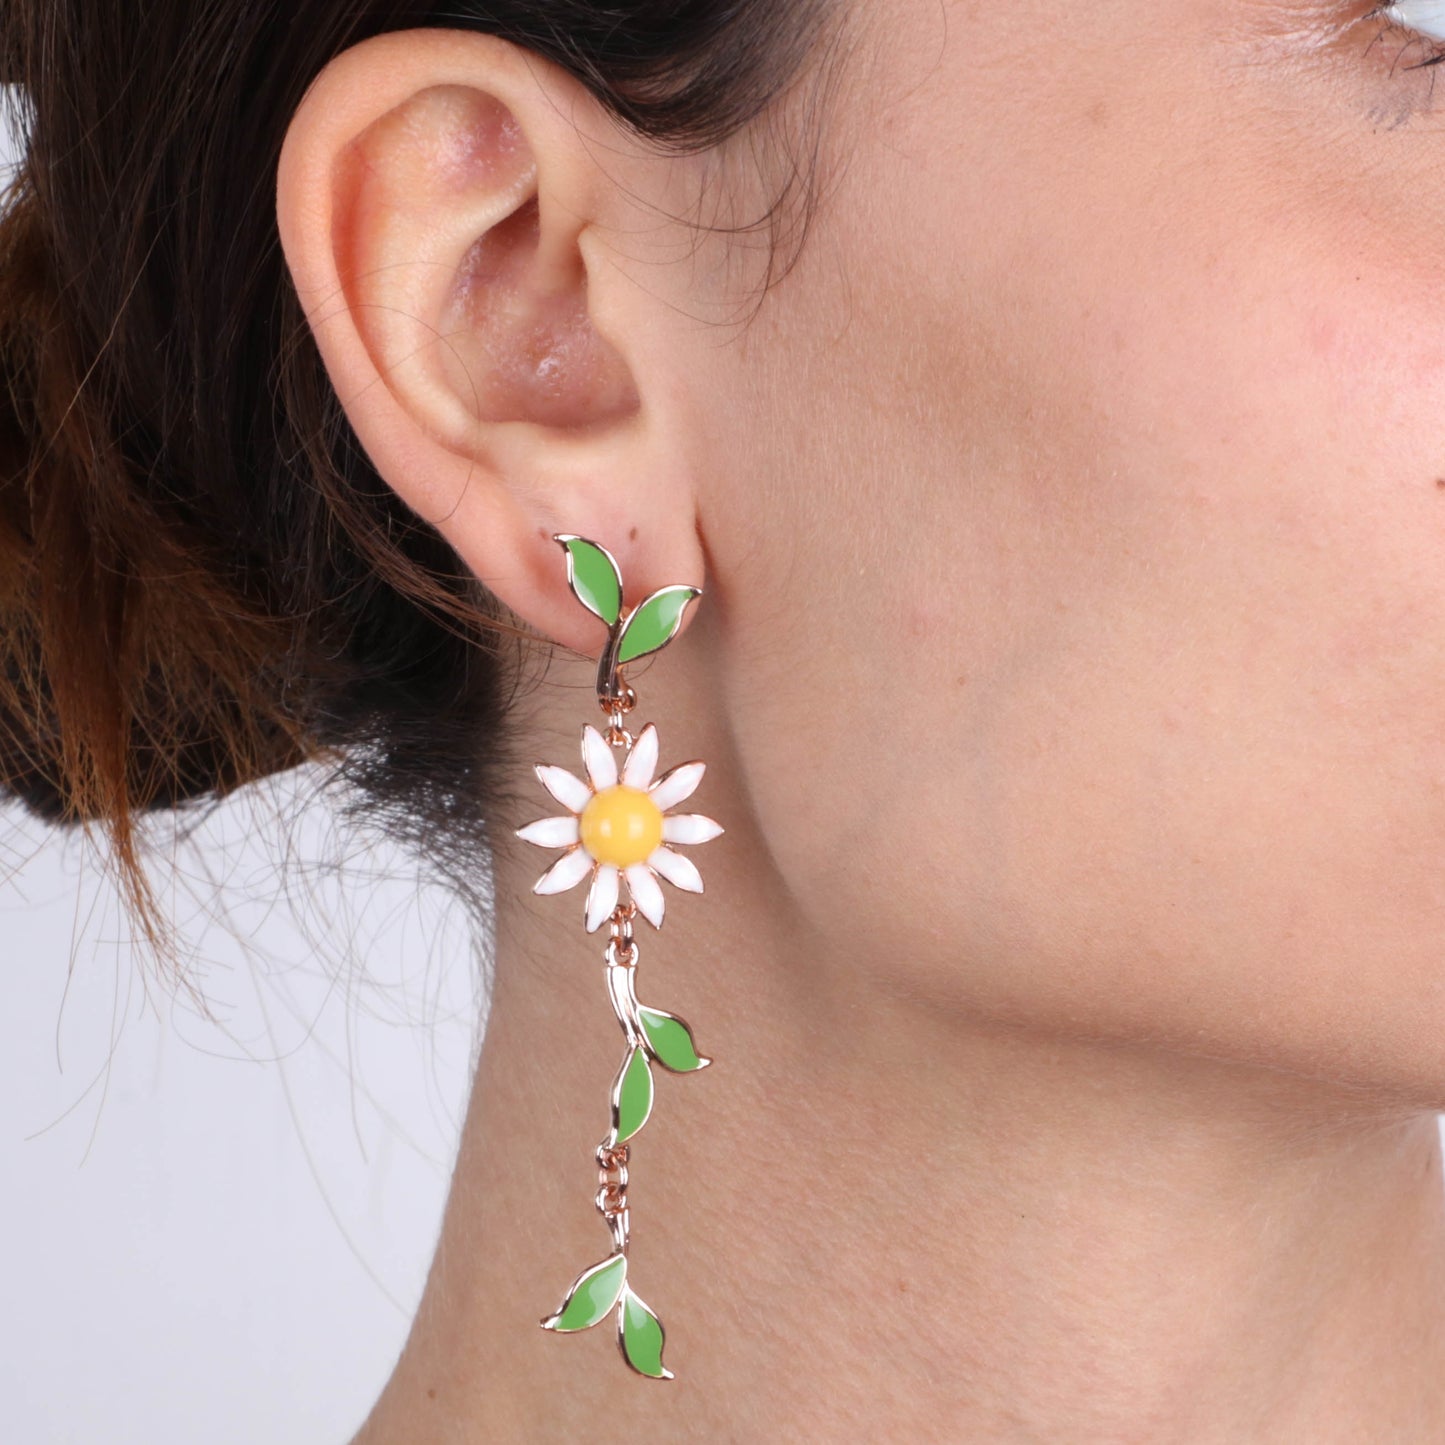 Metal earrings with margherita and pending leaves, embellished with colored glazes